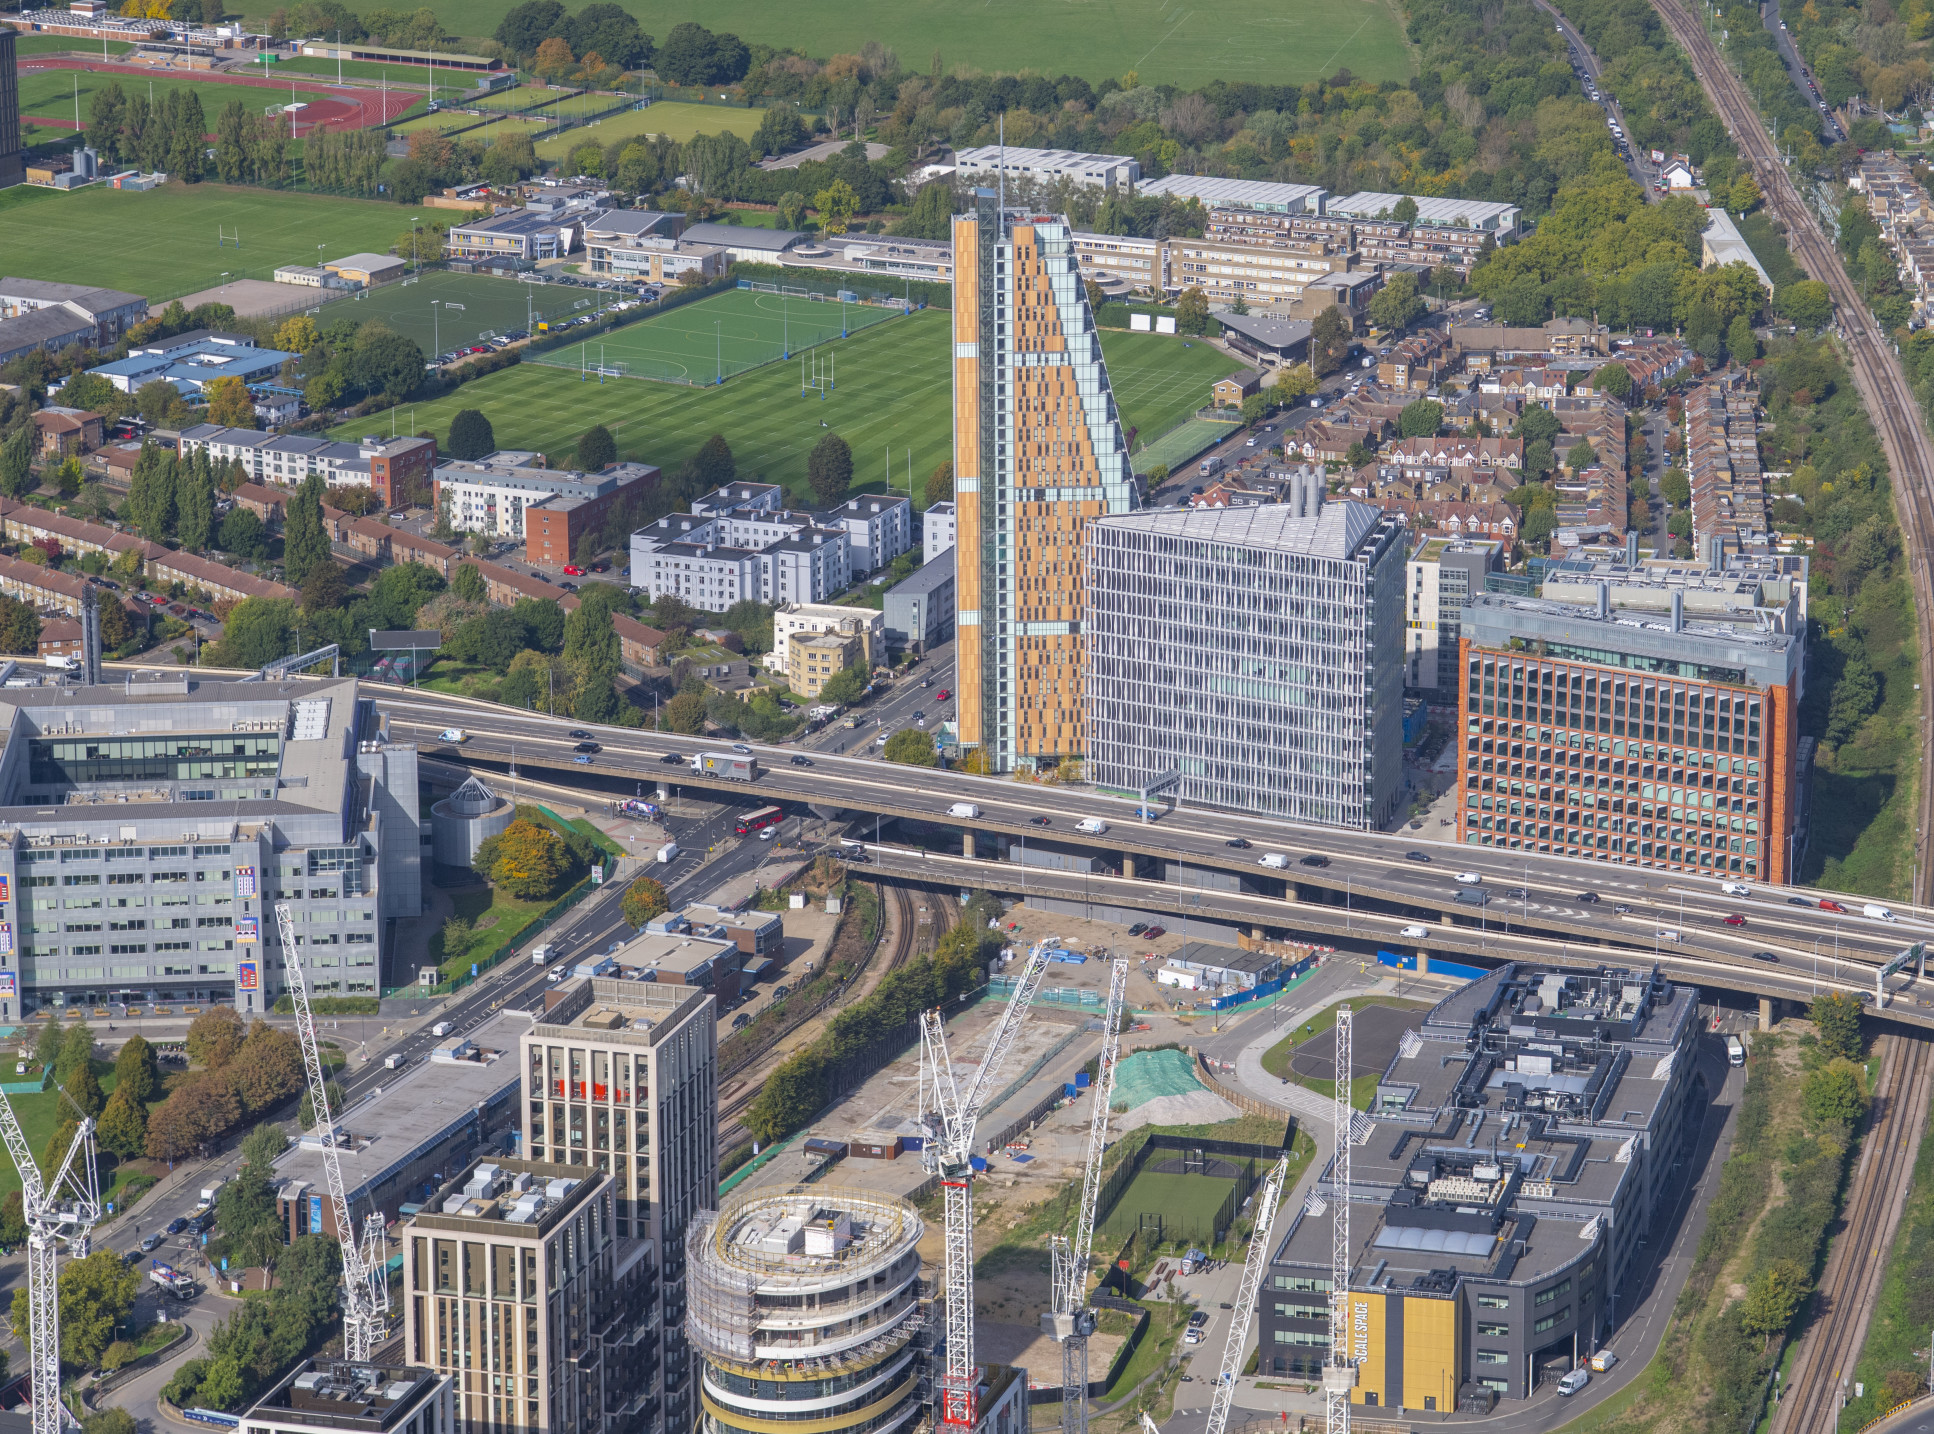 An aerial view of the White City Innovation District (WCID)